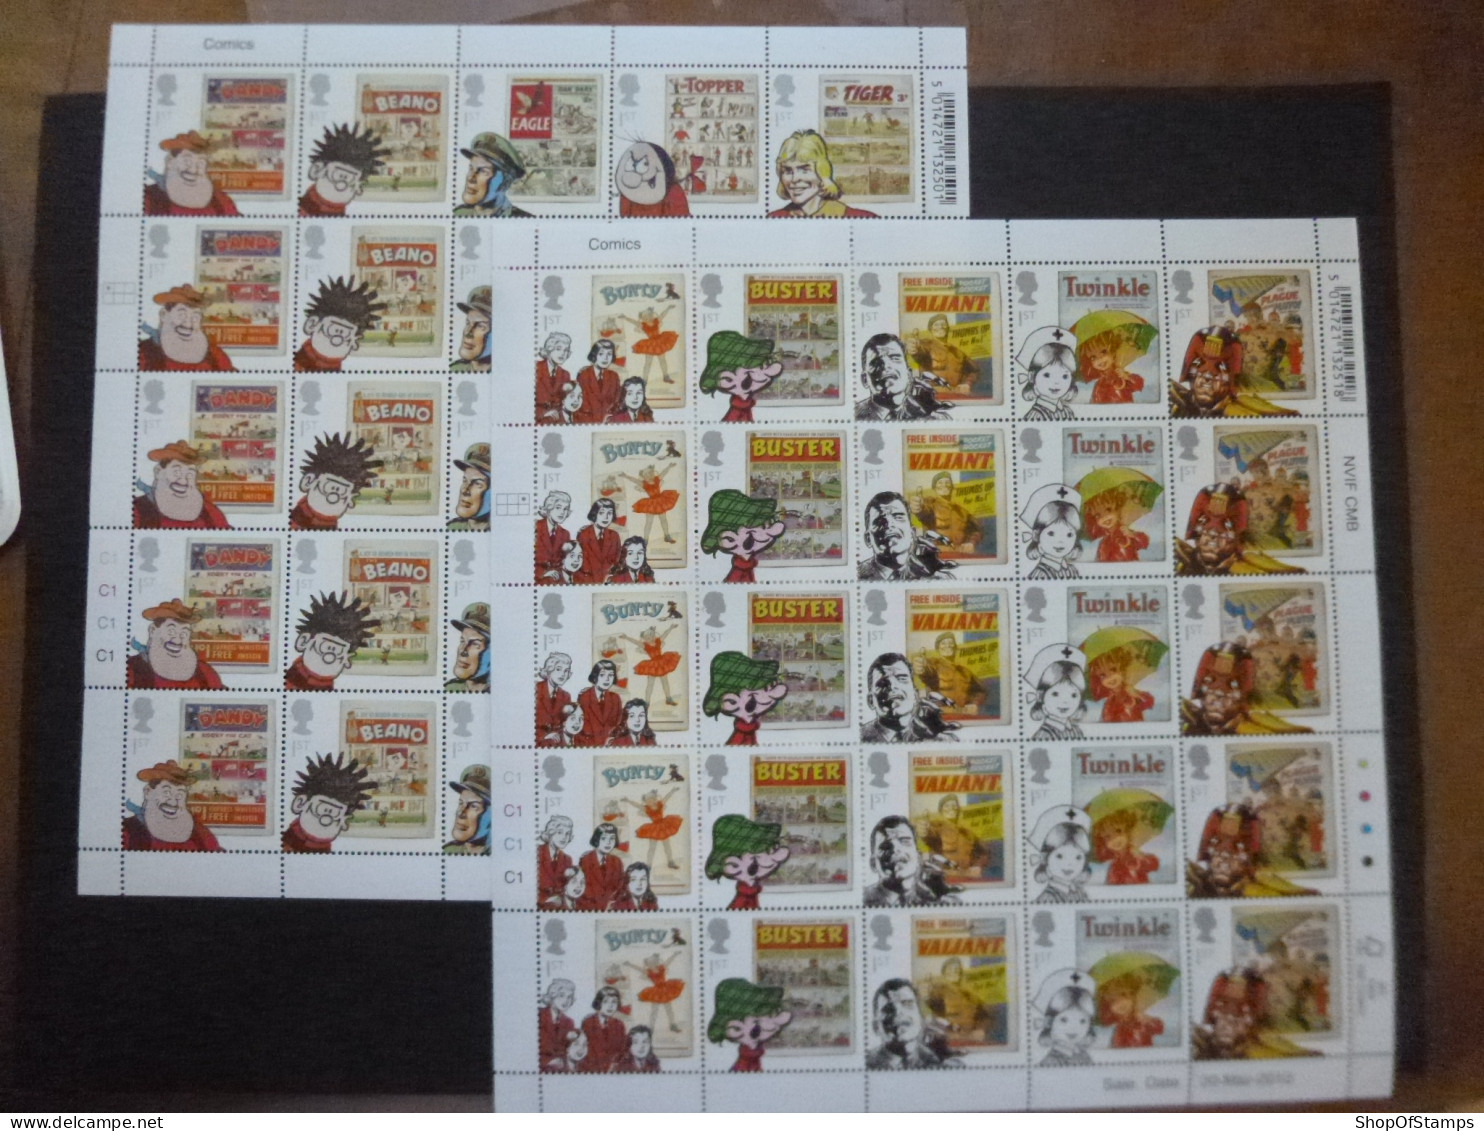 GREAT BRITAIN SG 3187+  2012 COMICS 2 FULL SHEETS 50 STAMPS - Sheets, Plate Blocks & Multiples